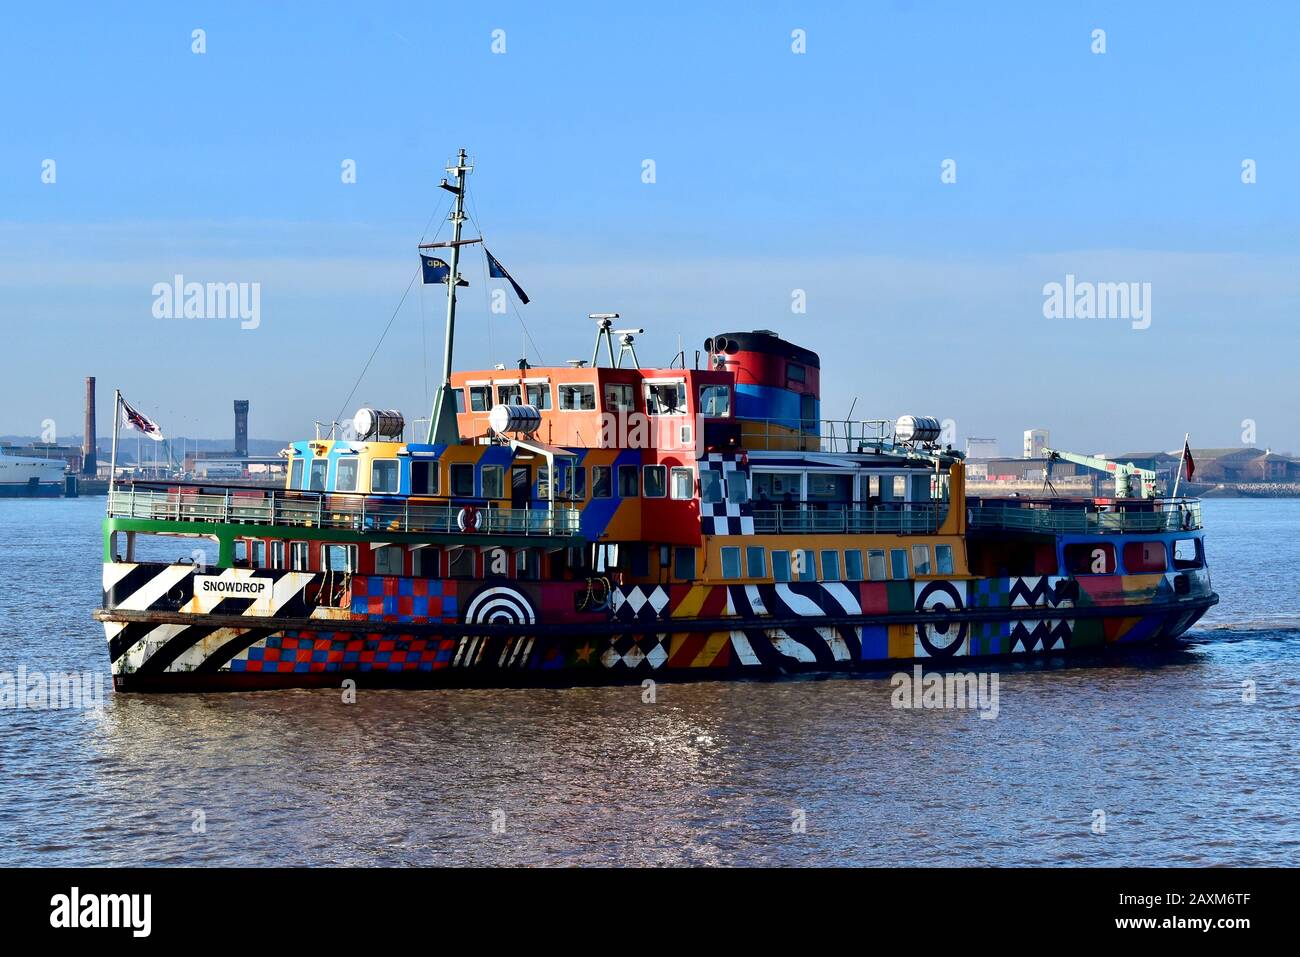 The Mersey ferry Snowdrop in her Dazzle paint. Stock Photo